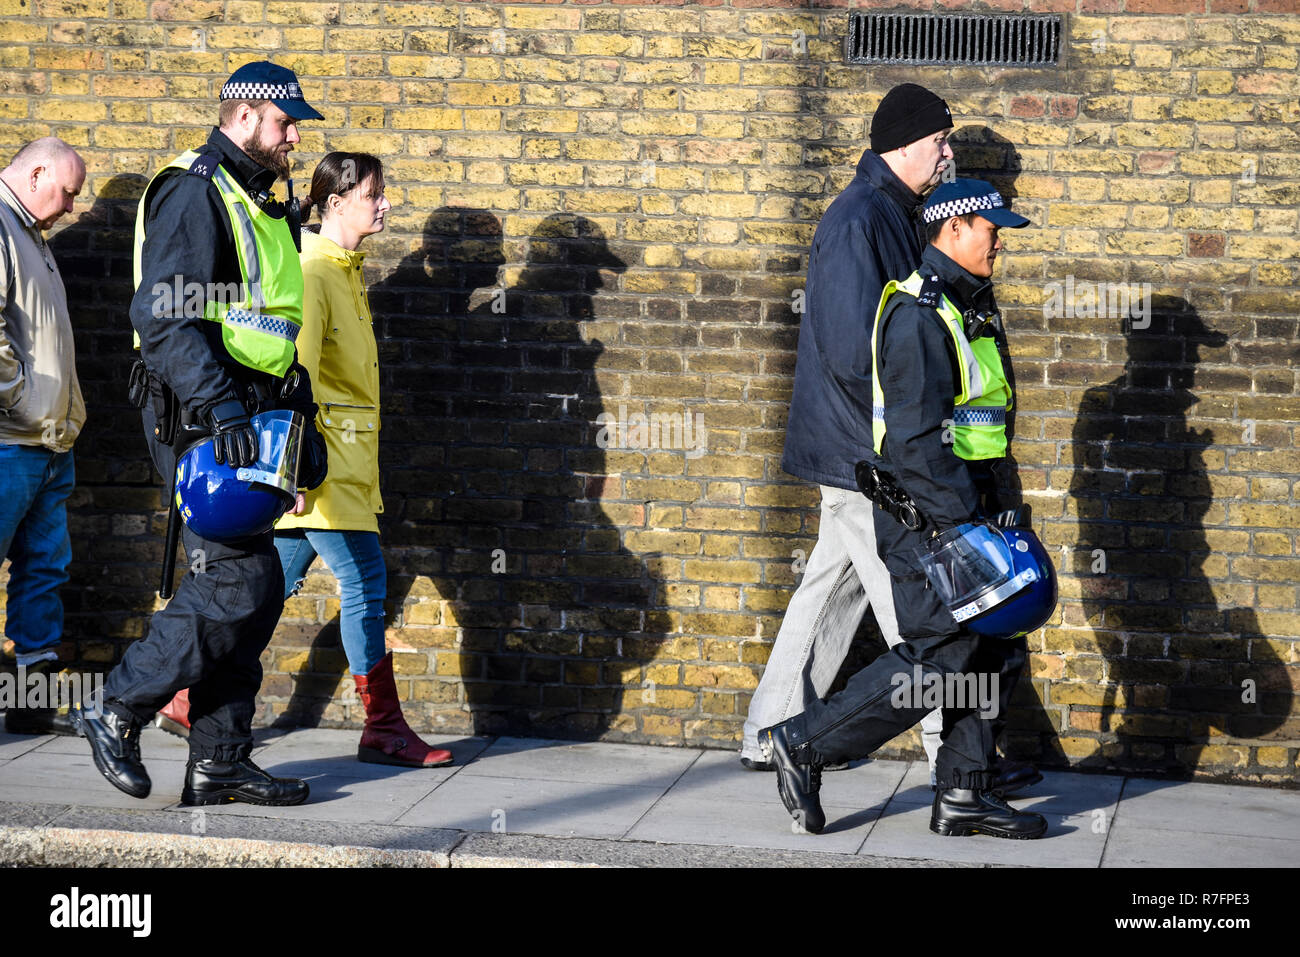 Brexit Betrayal March in London days before the planned Parliament vote. Police escort walking with shadows on wall in bright sunlight. People Stock Photo